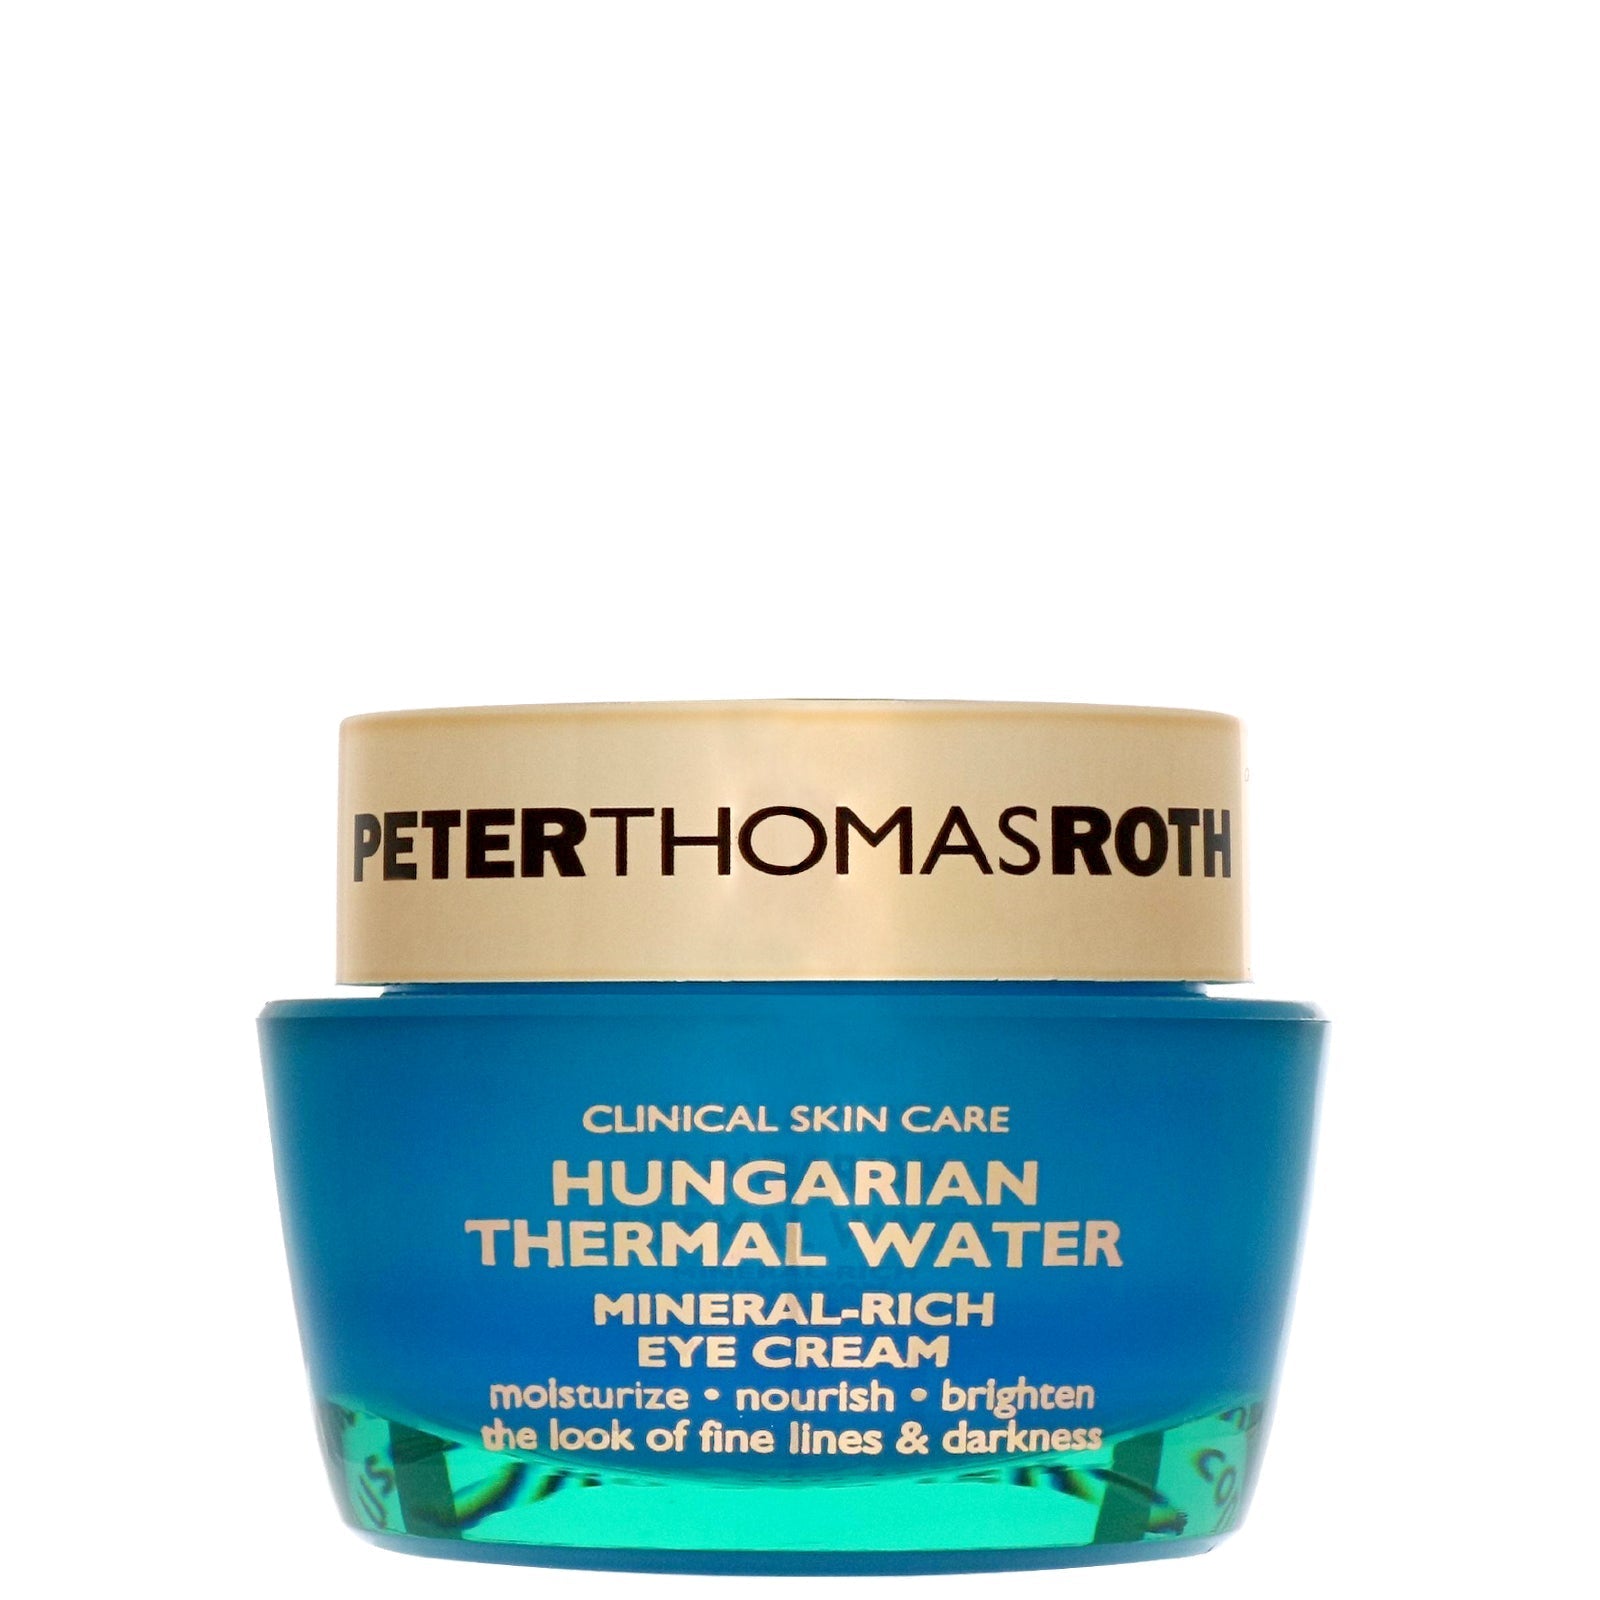 Peter Thomas Roth Hungarian Thermal Water Mineral-Rich Eye Cream 15ml - Feel Gorgeous